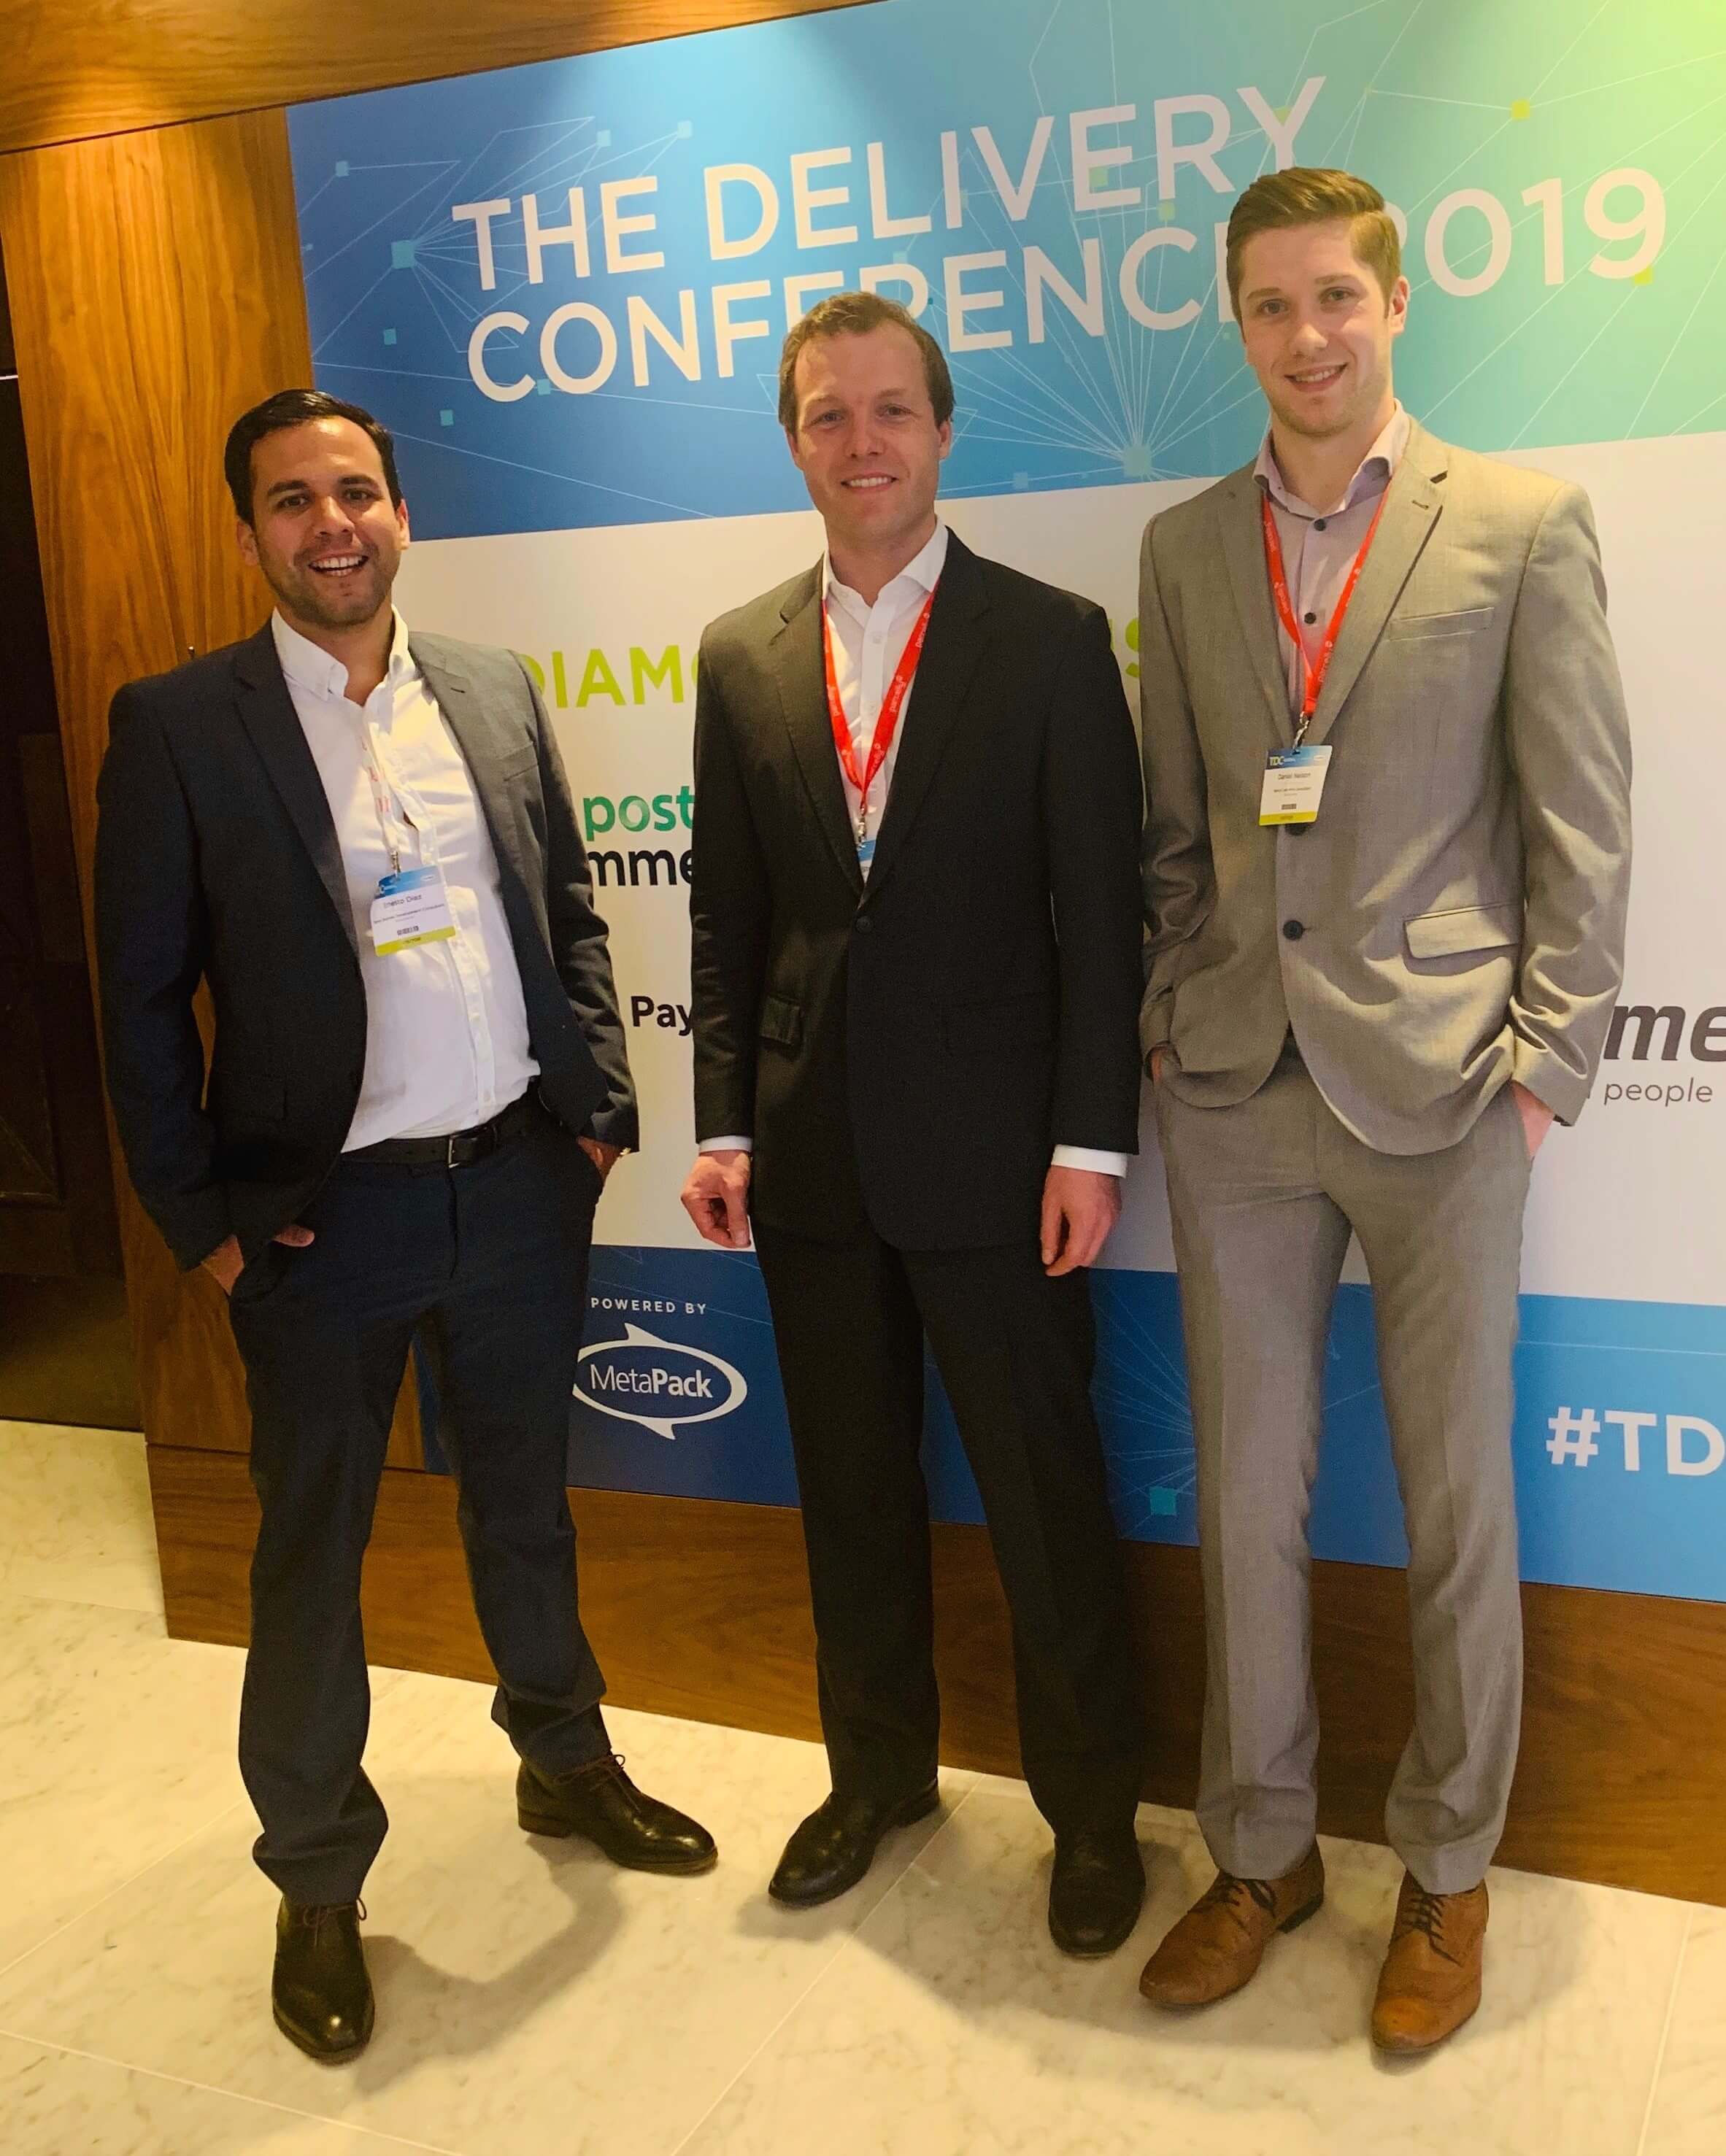 Parcelly Team at Metapack Delivery conference 2019 cropped